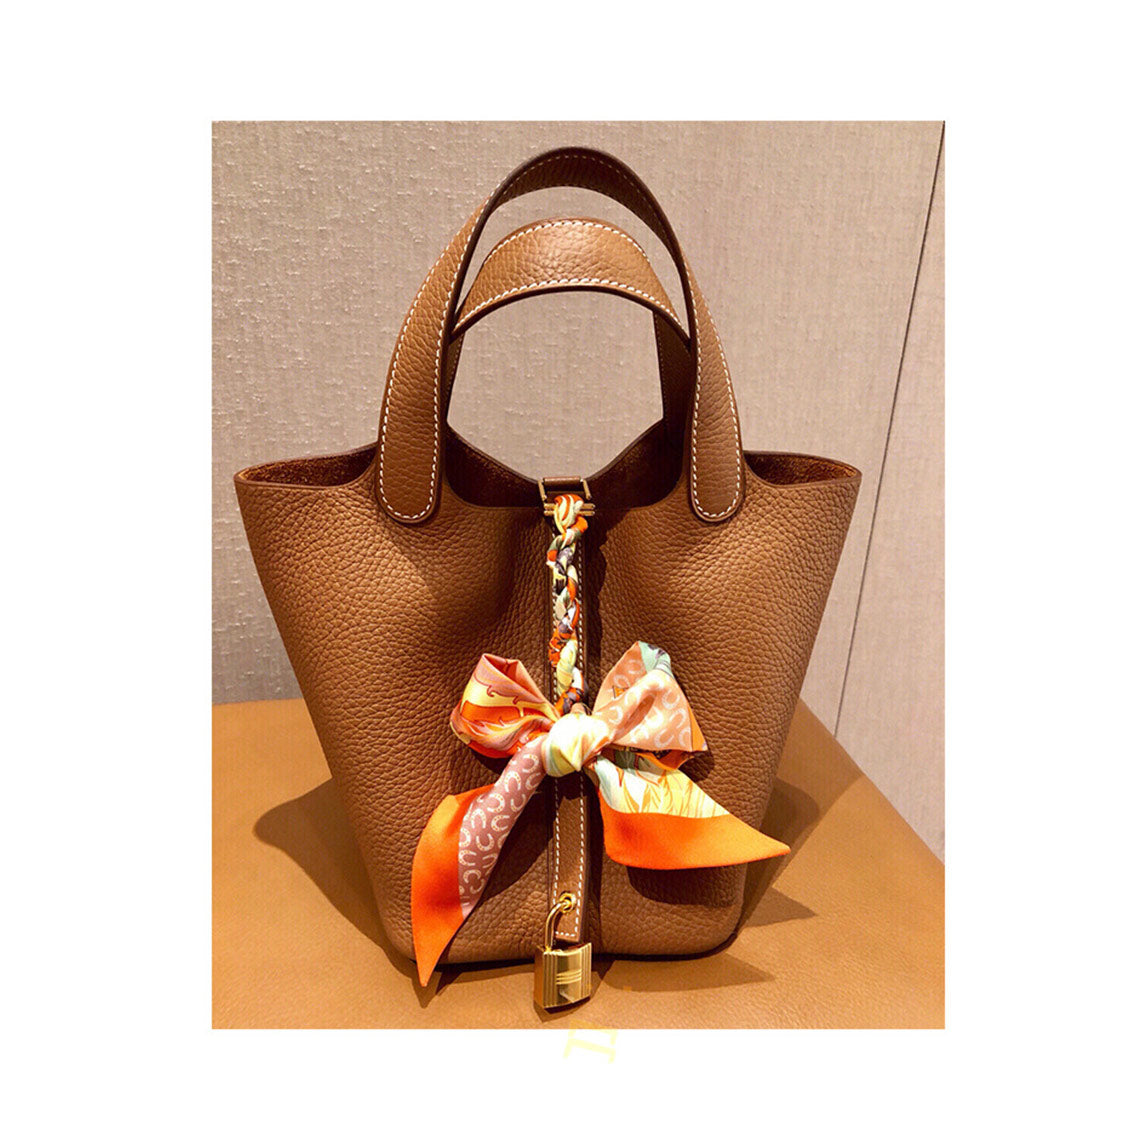 Gold Brown Leather Tote Handbag | Replica Inspired Picotin Lock Bag - POPSEWING™